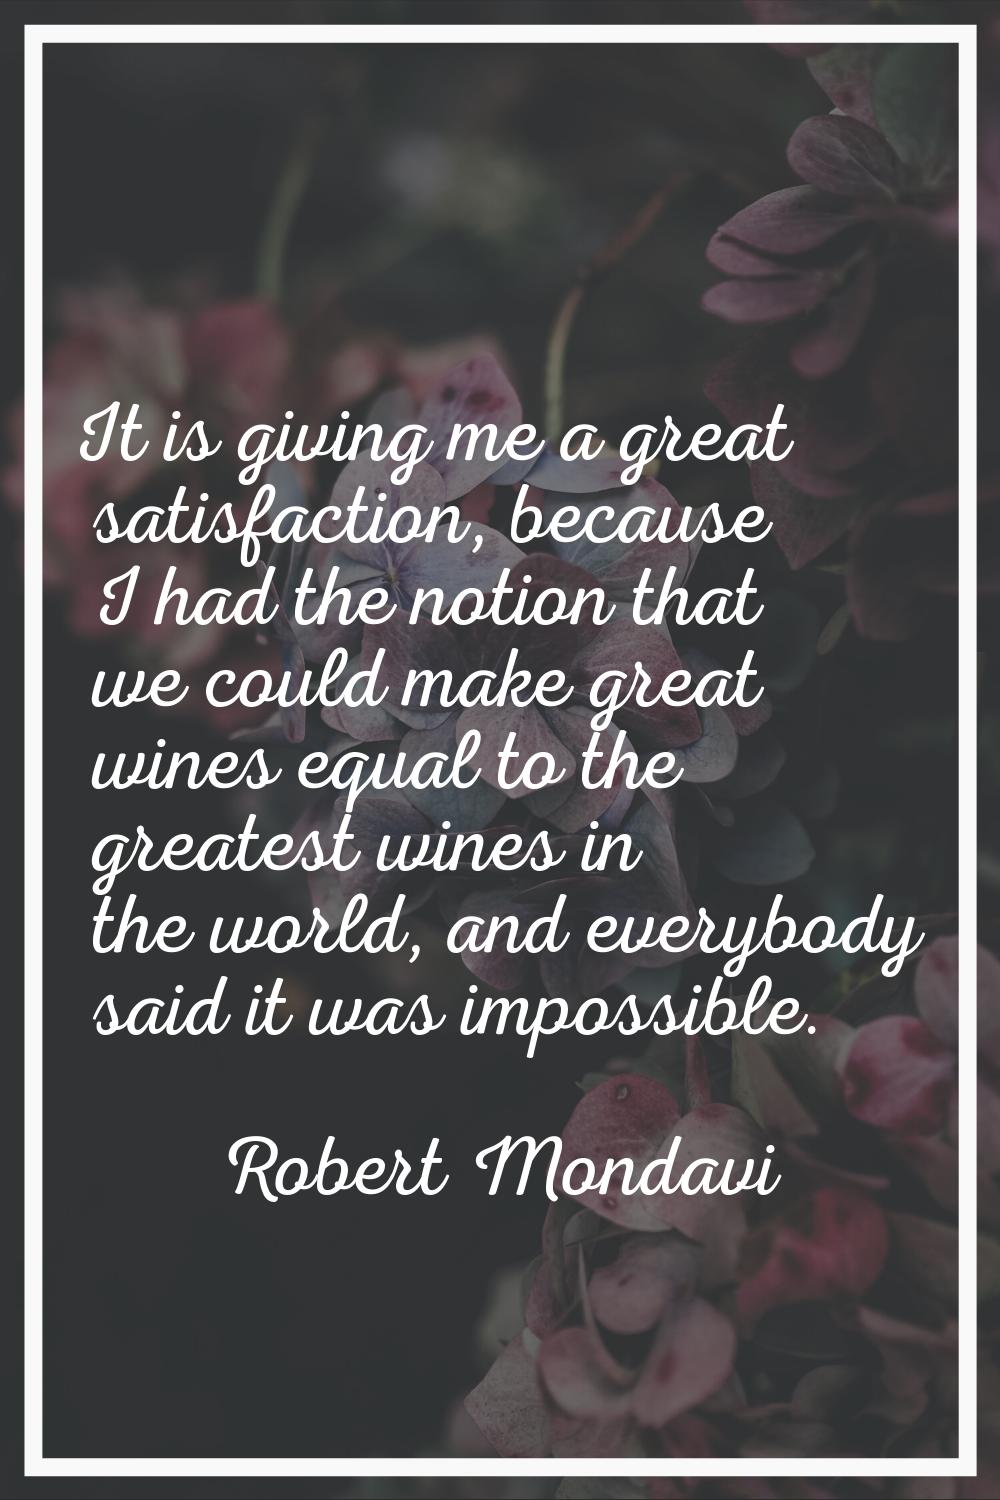 It is giving me a great satisfaction, because I had the notion that we could make great wines equal